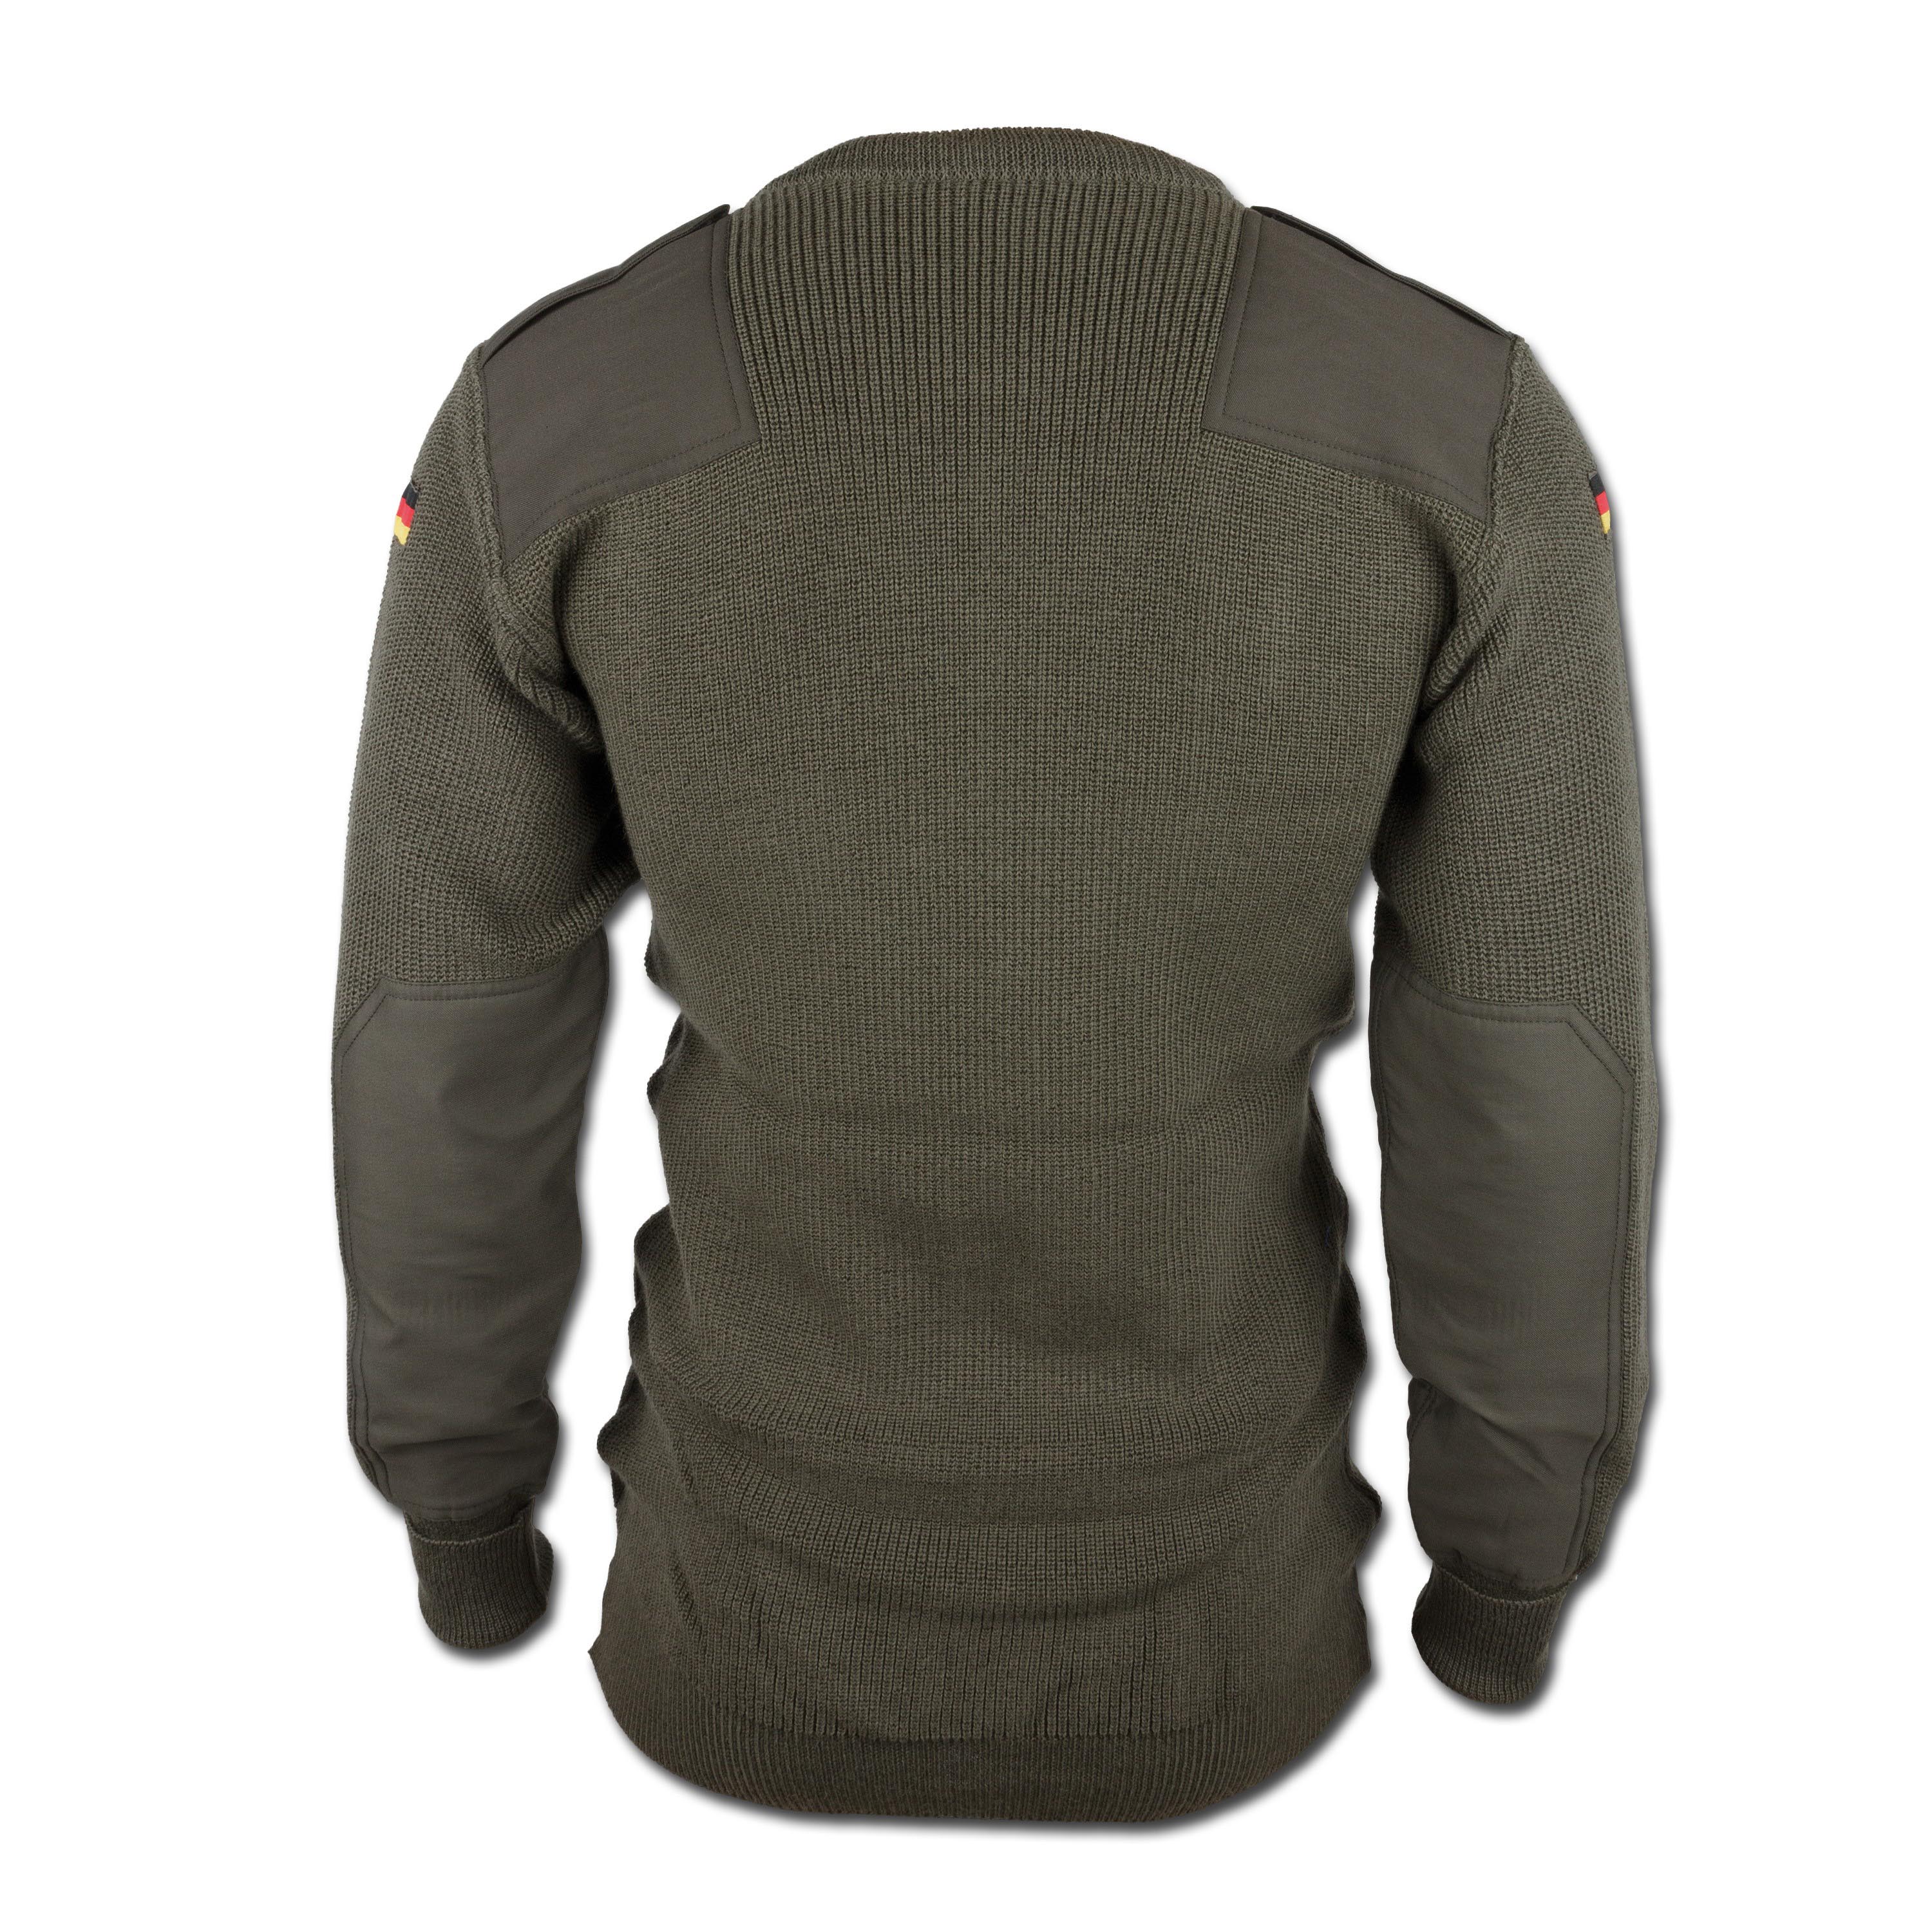 German Army Sweater New olive green